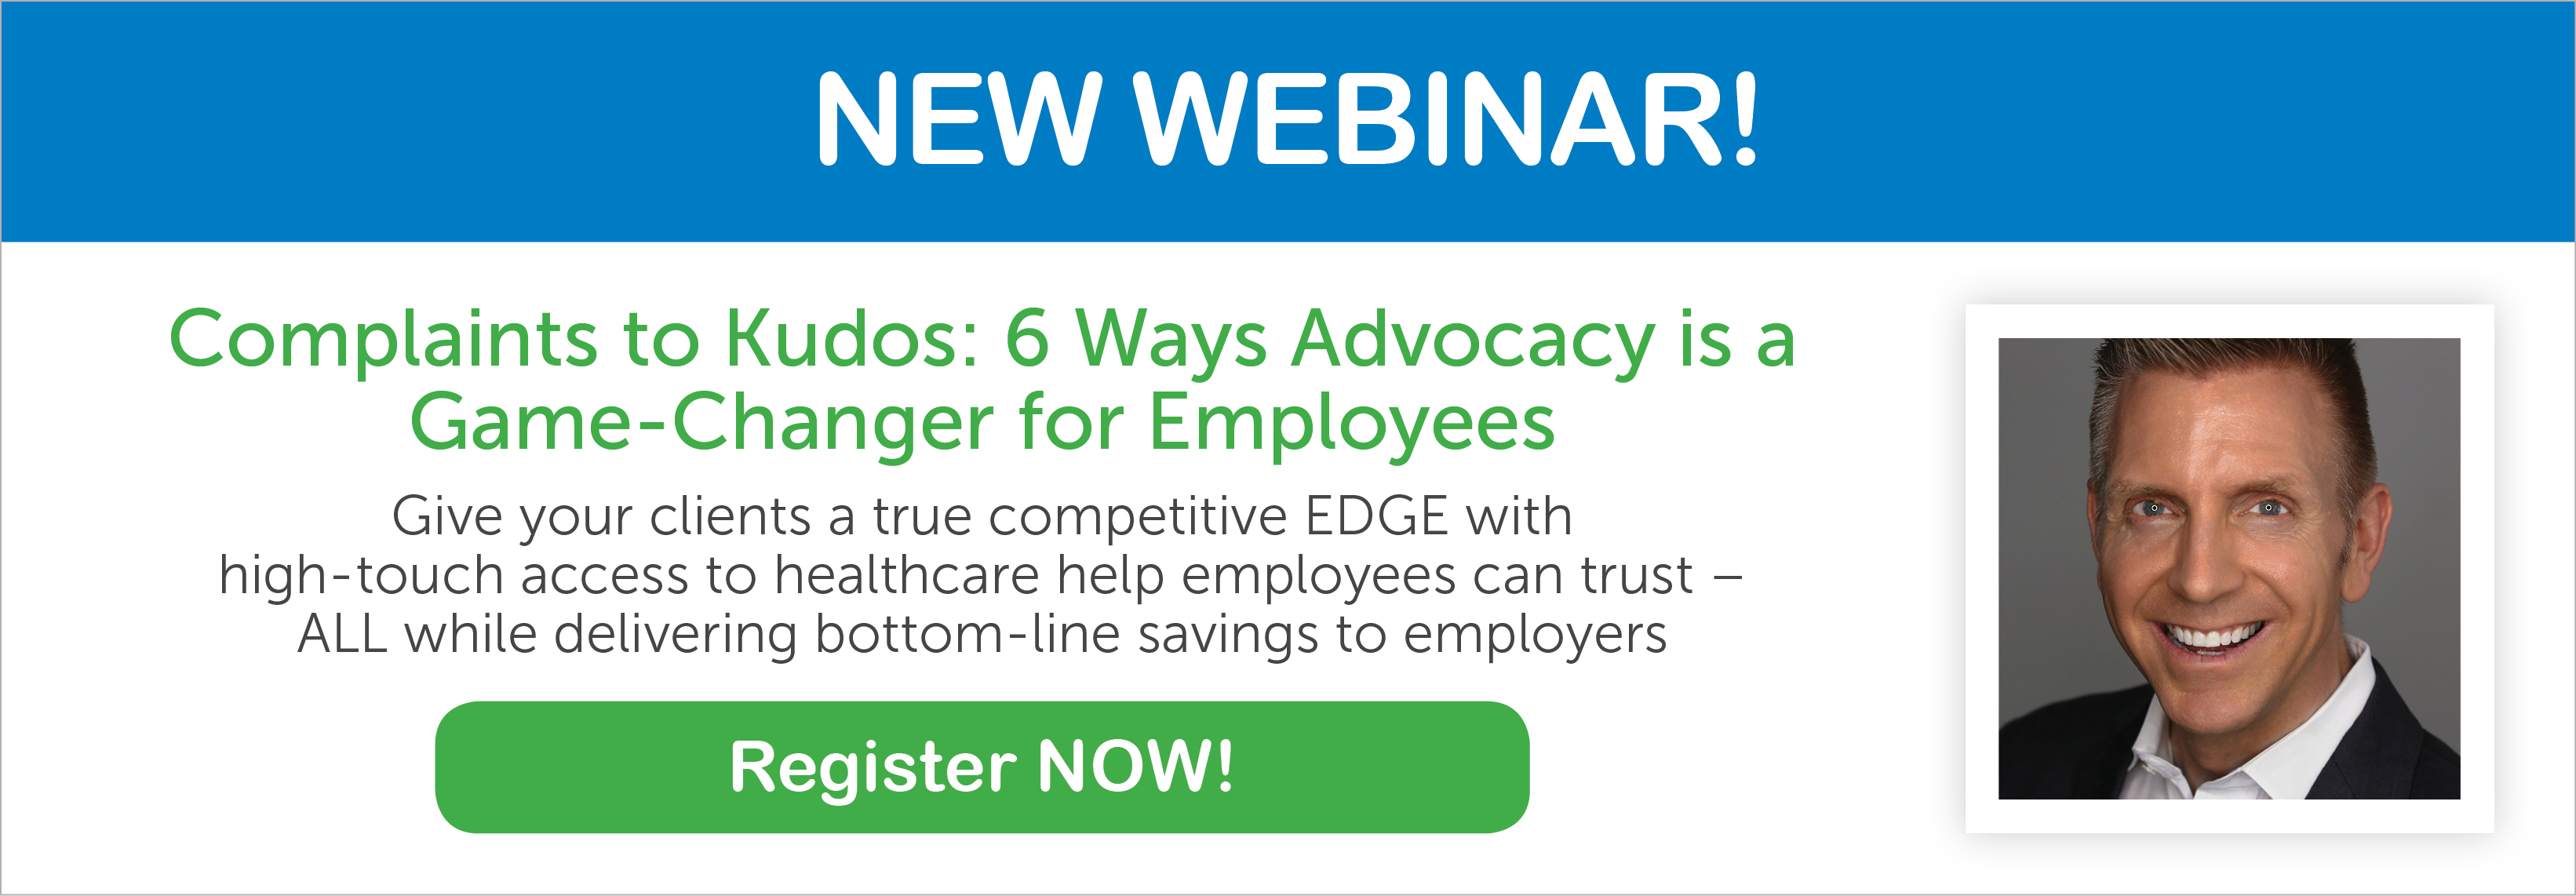 Complaints to Kudos: 6 Ways Advocacy is a Game-Changer for Employees